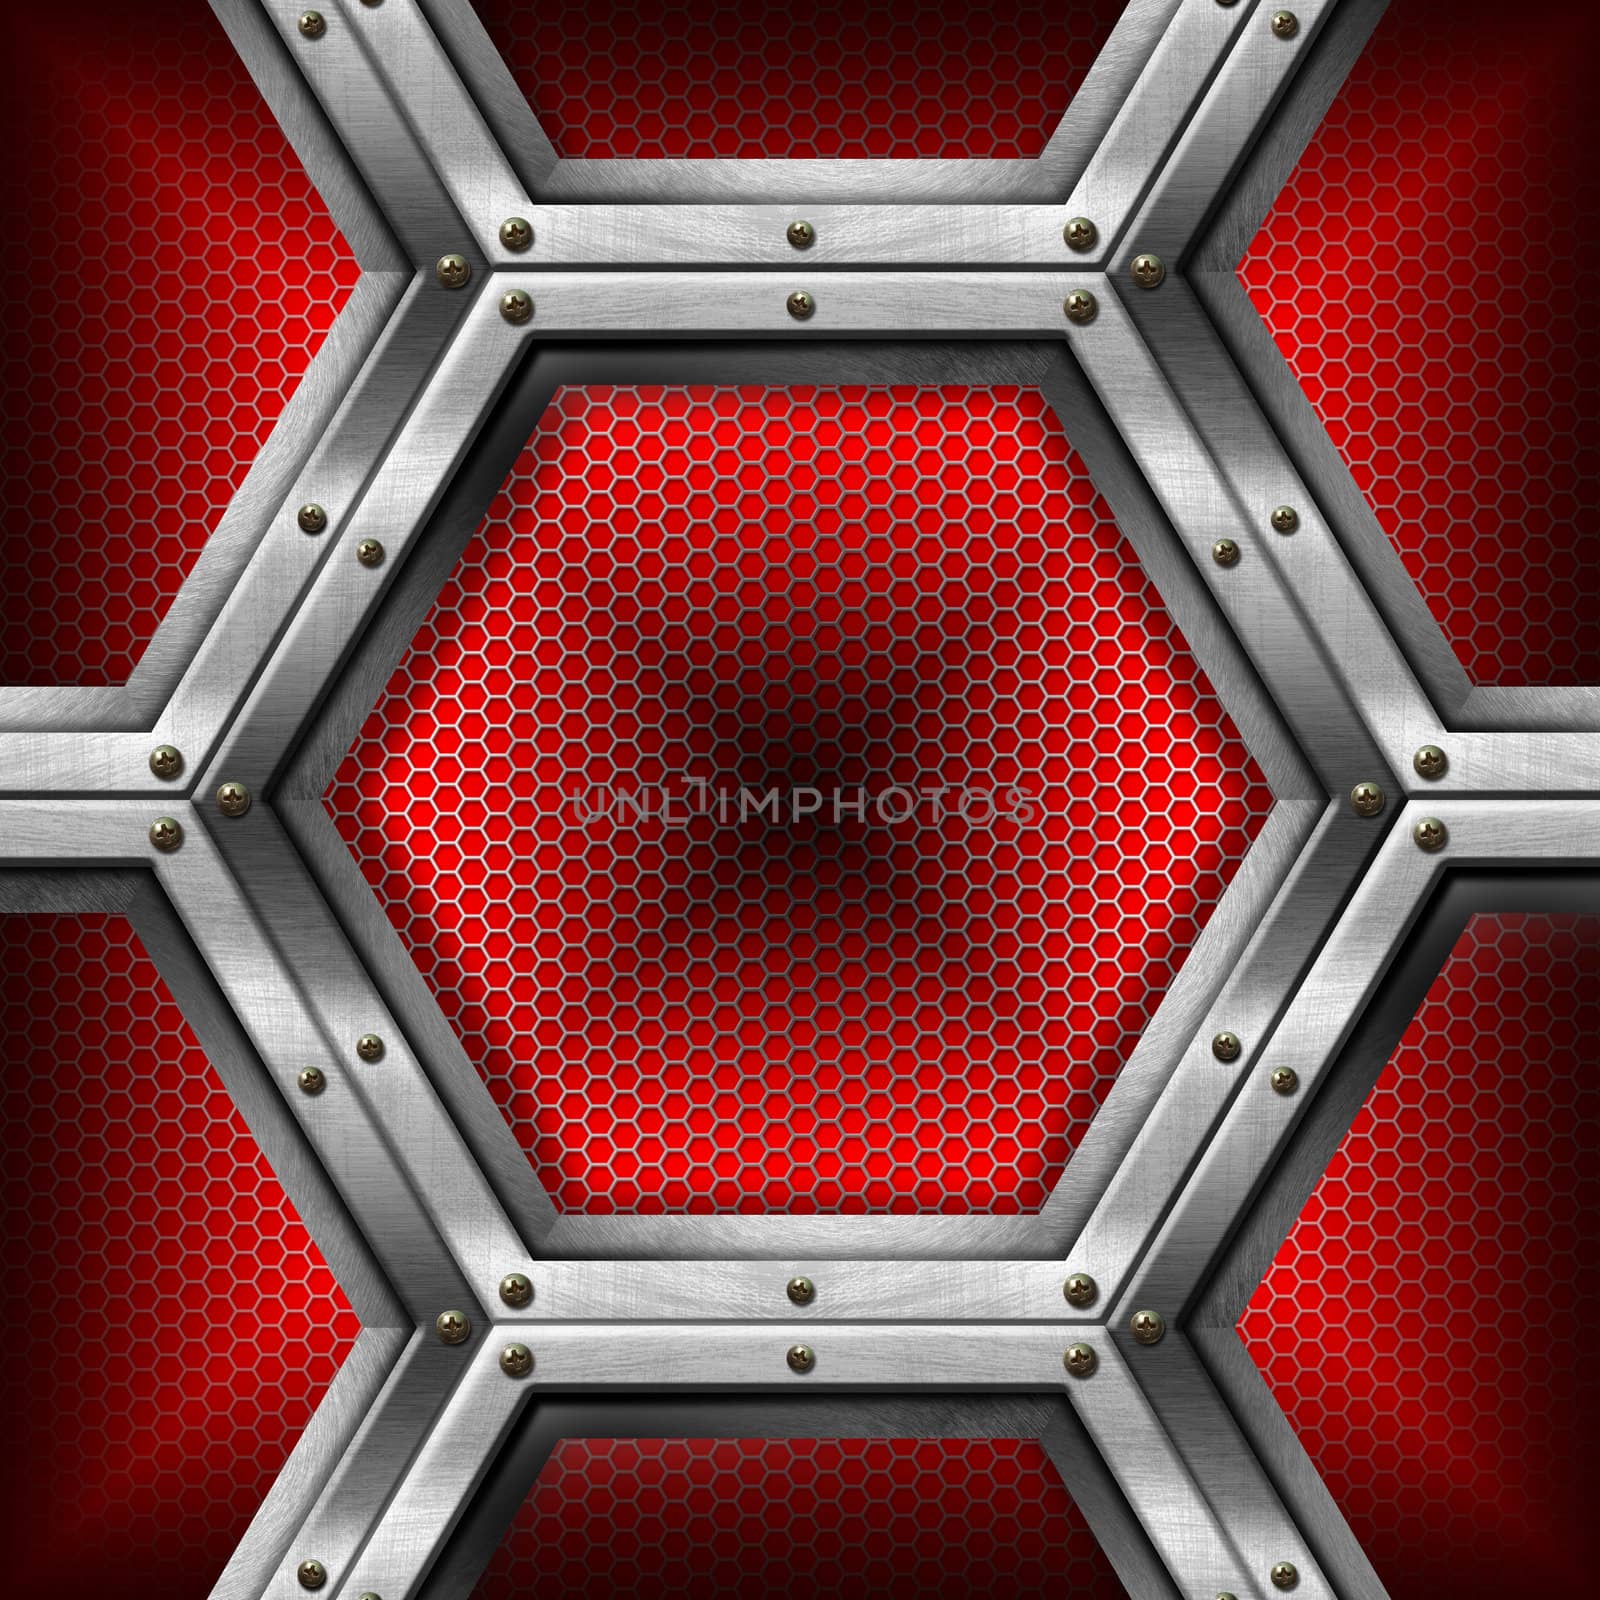 Red and metal business background with grid, hexagons and reflections
